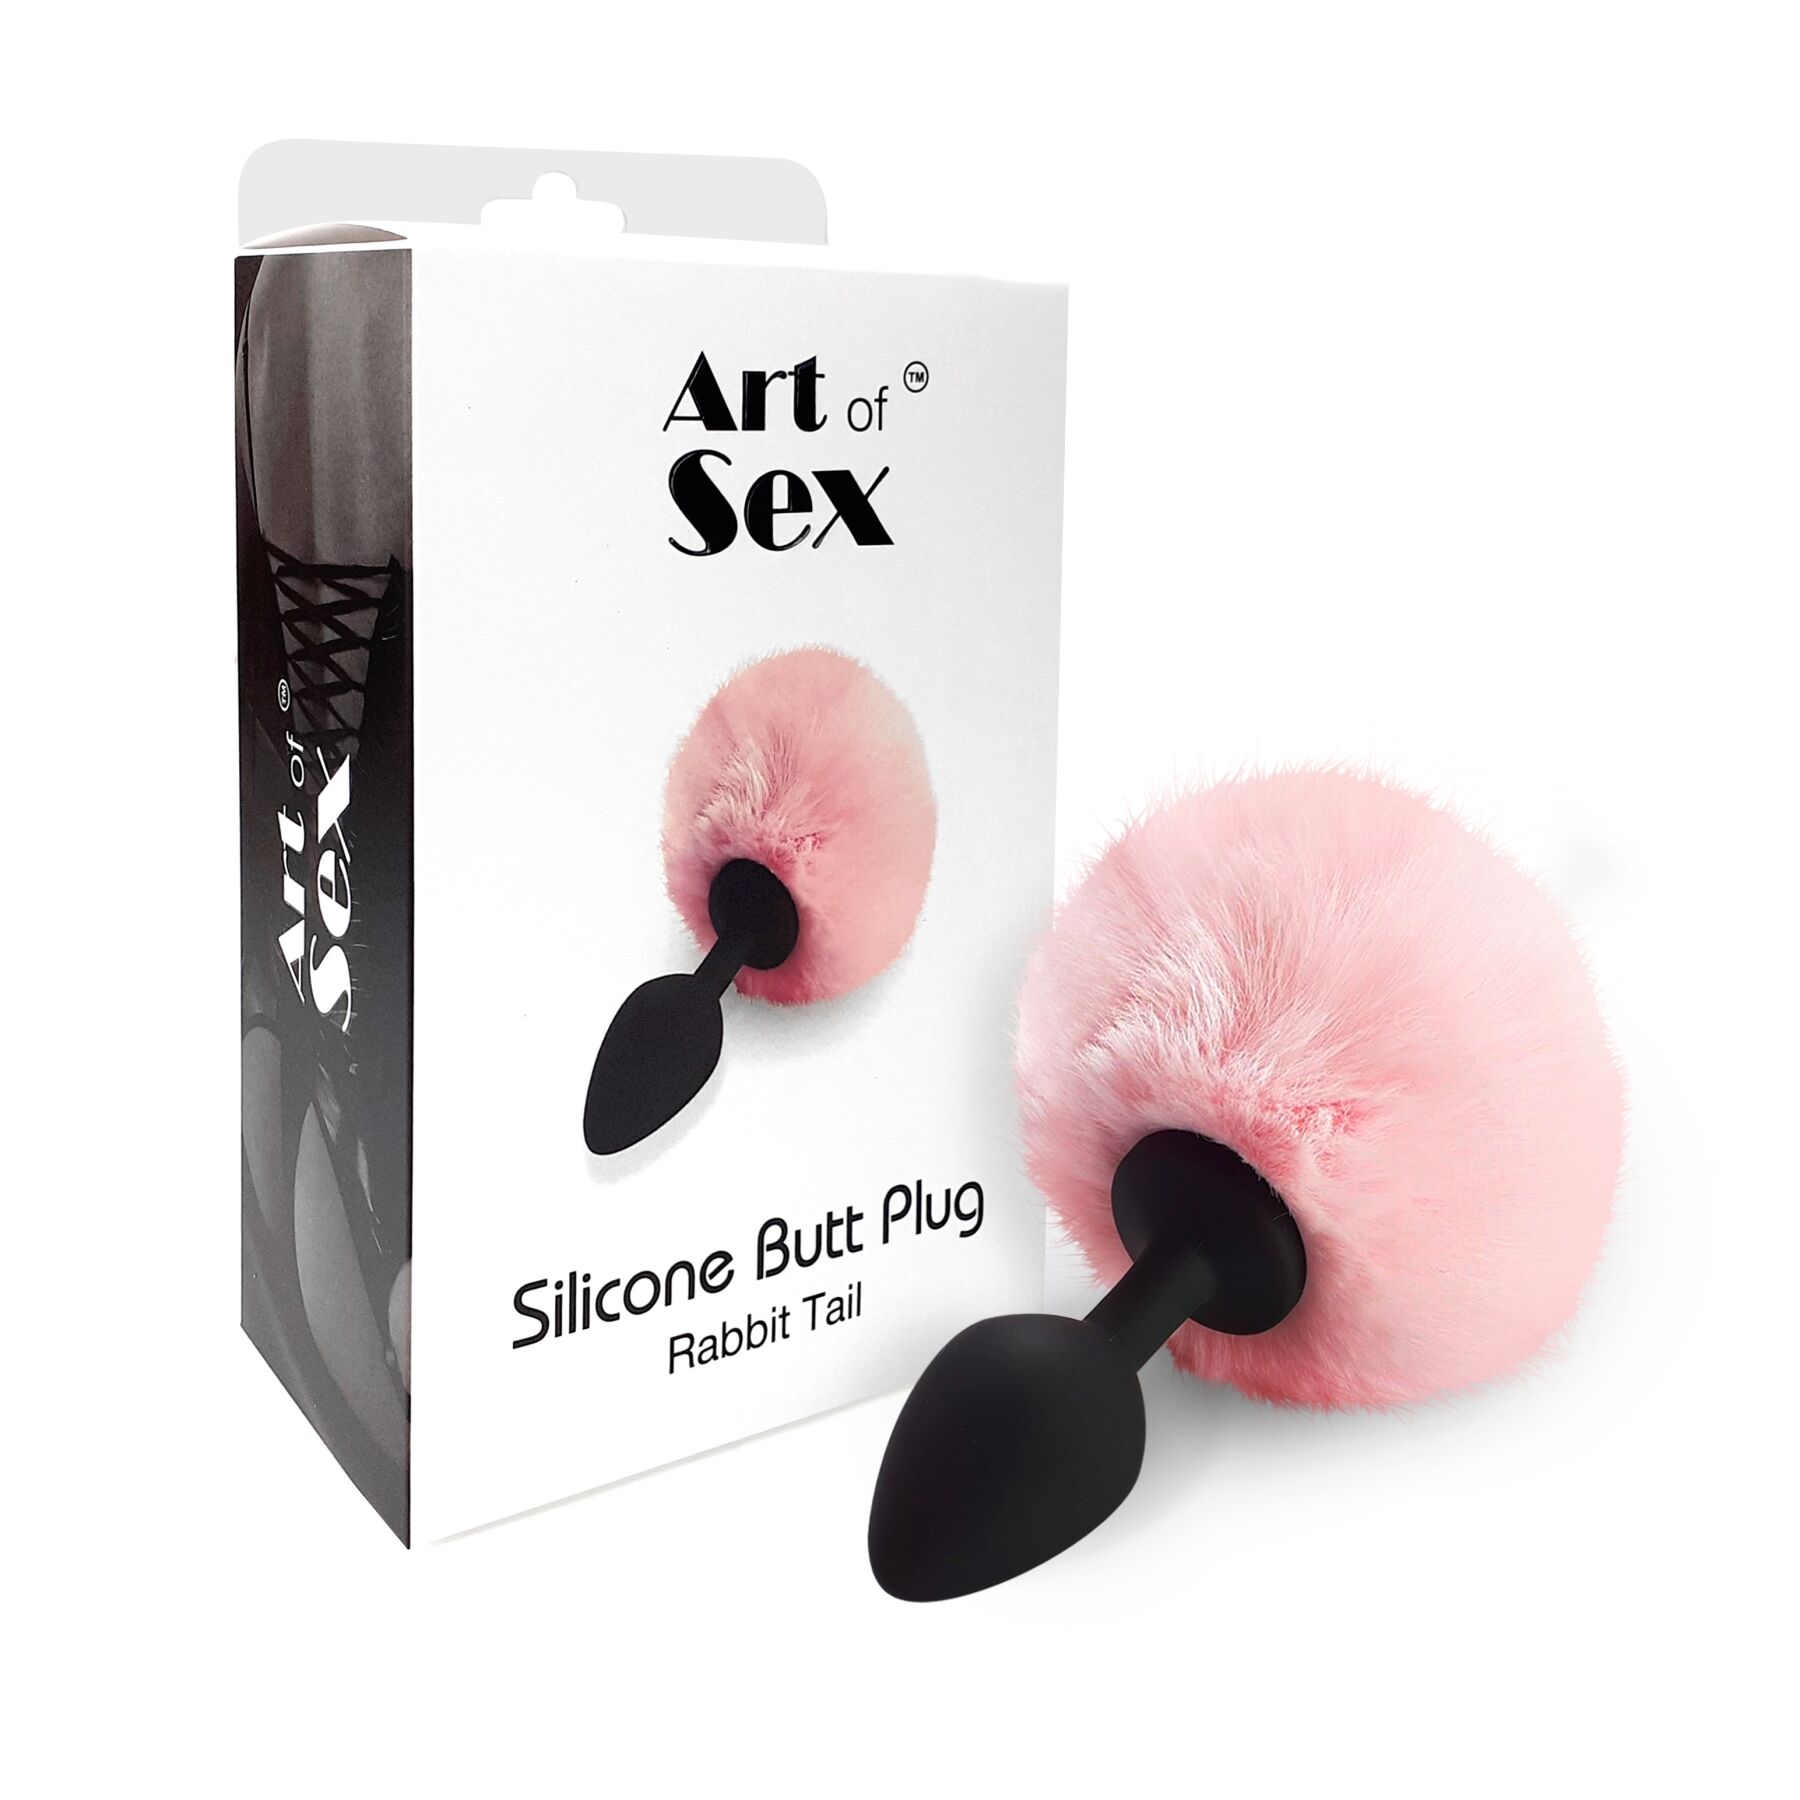     Art of Sex — Silicone Butt plug Rabbit Tail, 